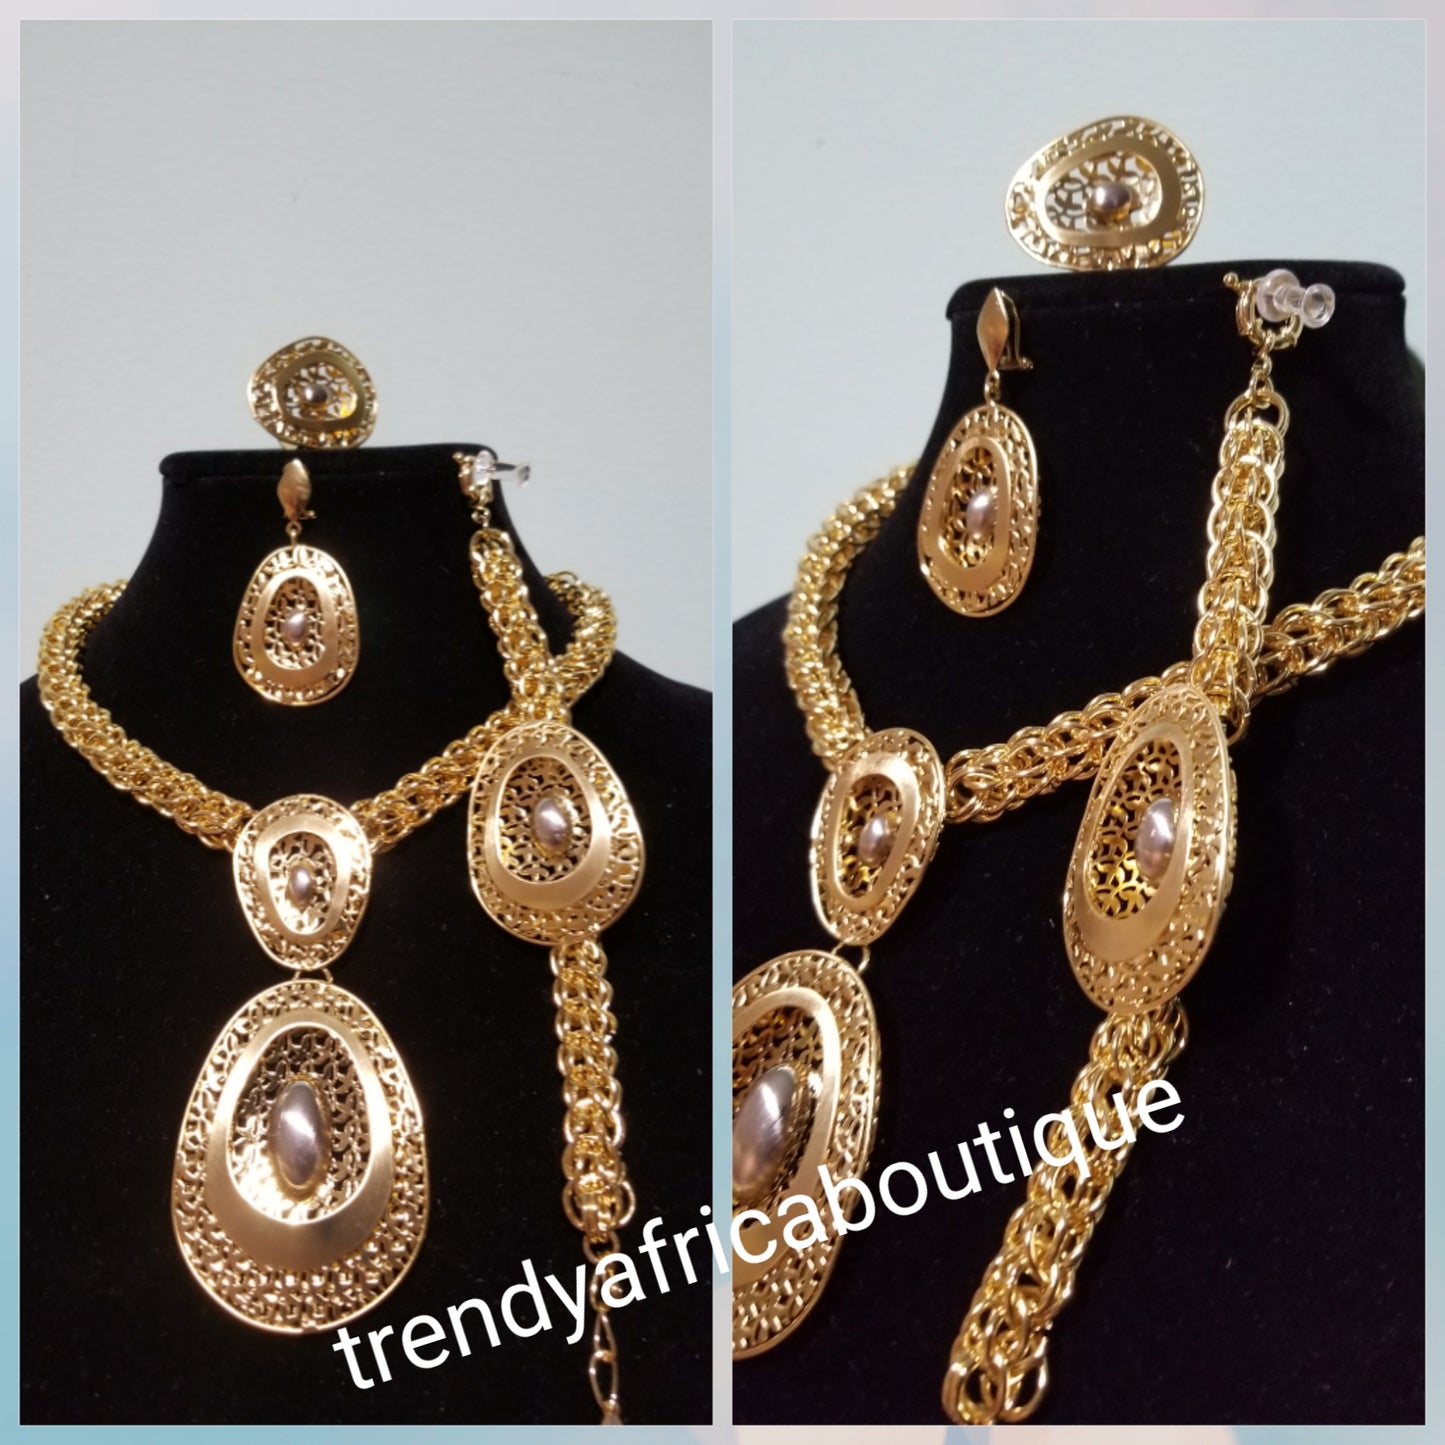 18k Gold plated quality Dubai necklace set. 4pcs African Costume Jewelry set. Brand new set. Sold as set